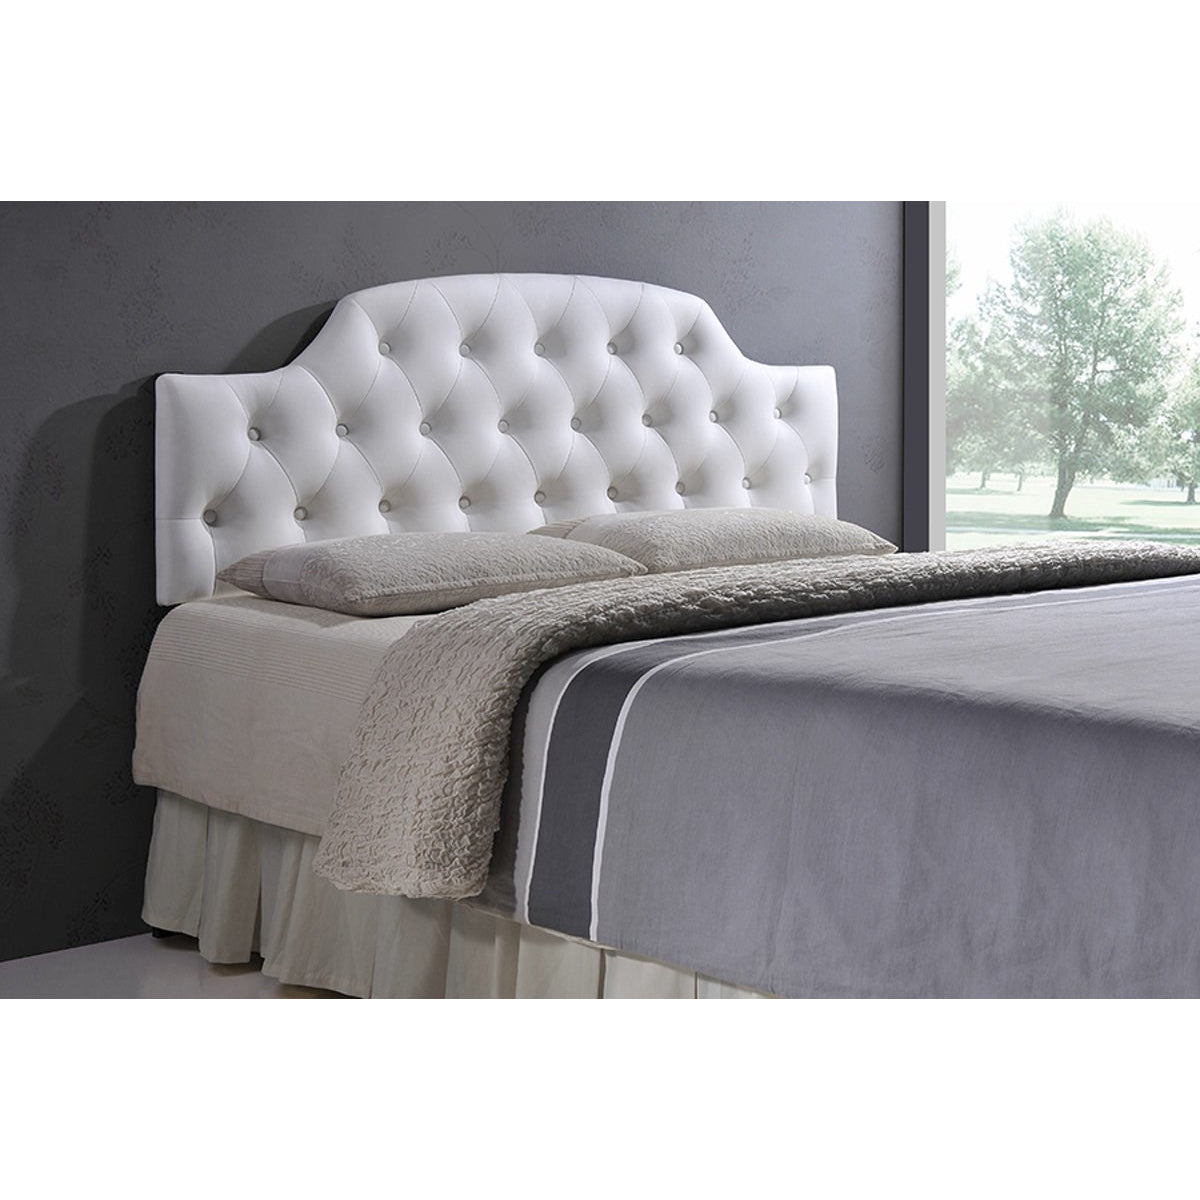 Baxton Studio Morris Modern and Contemporary Queen Size White Faux Leather Upholstered Button-tufted Scalloped Headboard Baxton Studio-Headboards-Minimal And Modern - 2